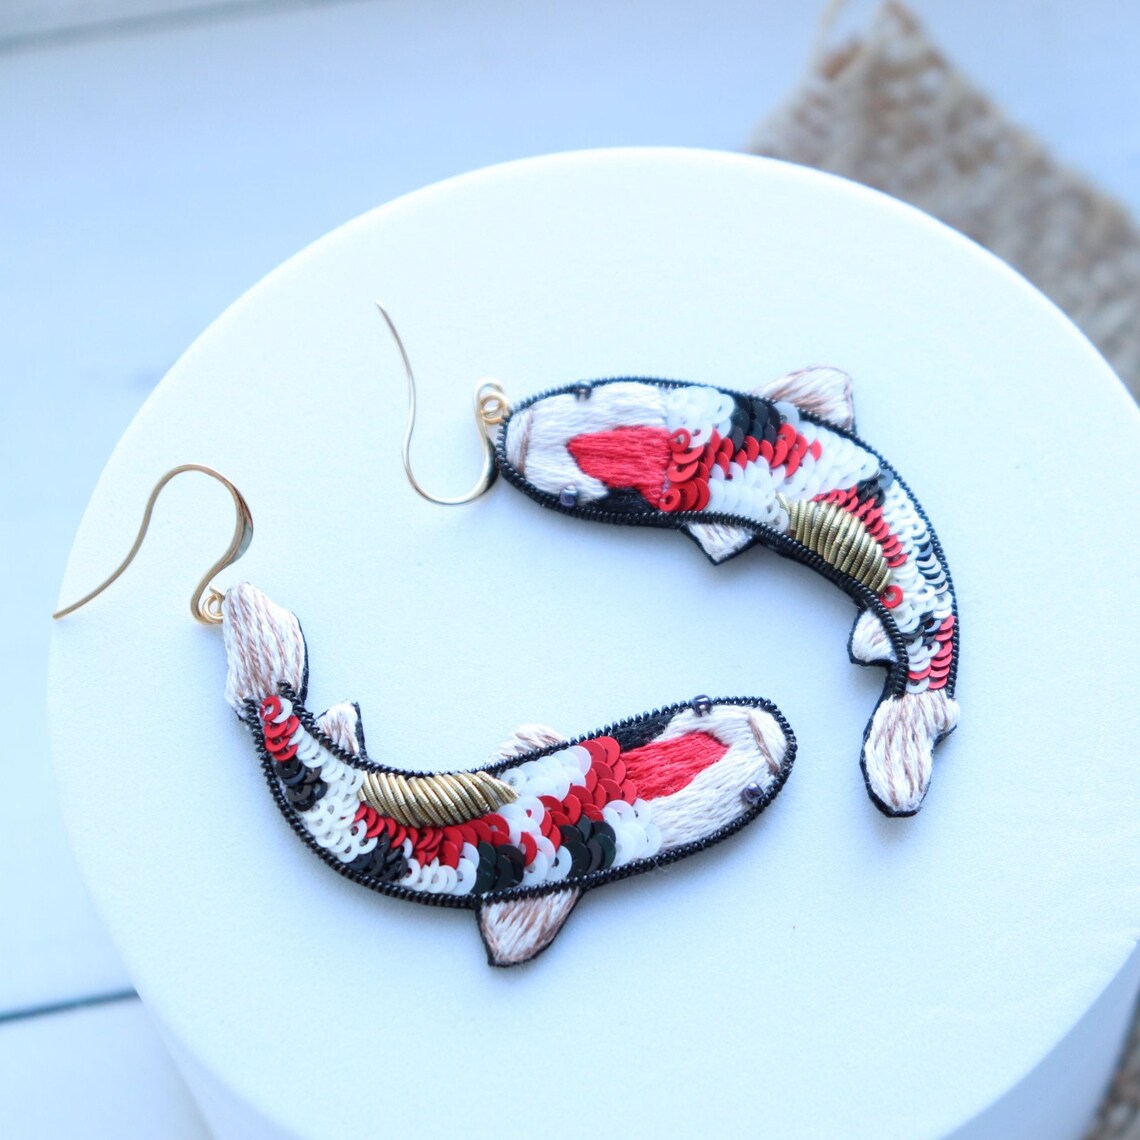 Eye Catching Handmade Embroidered Earrings By Vivaembr (22)